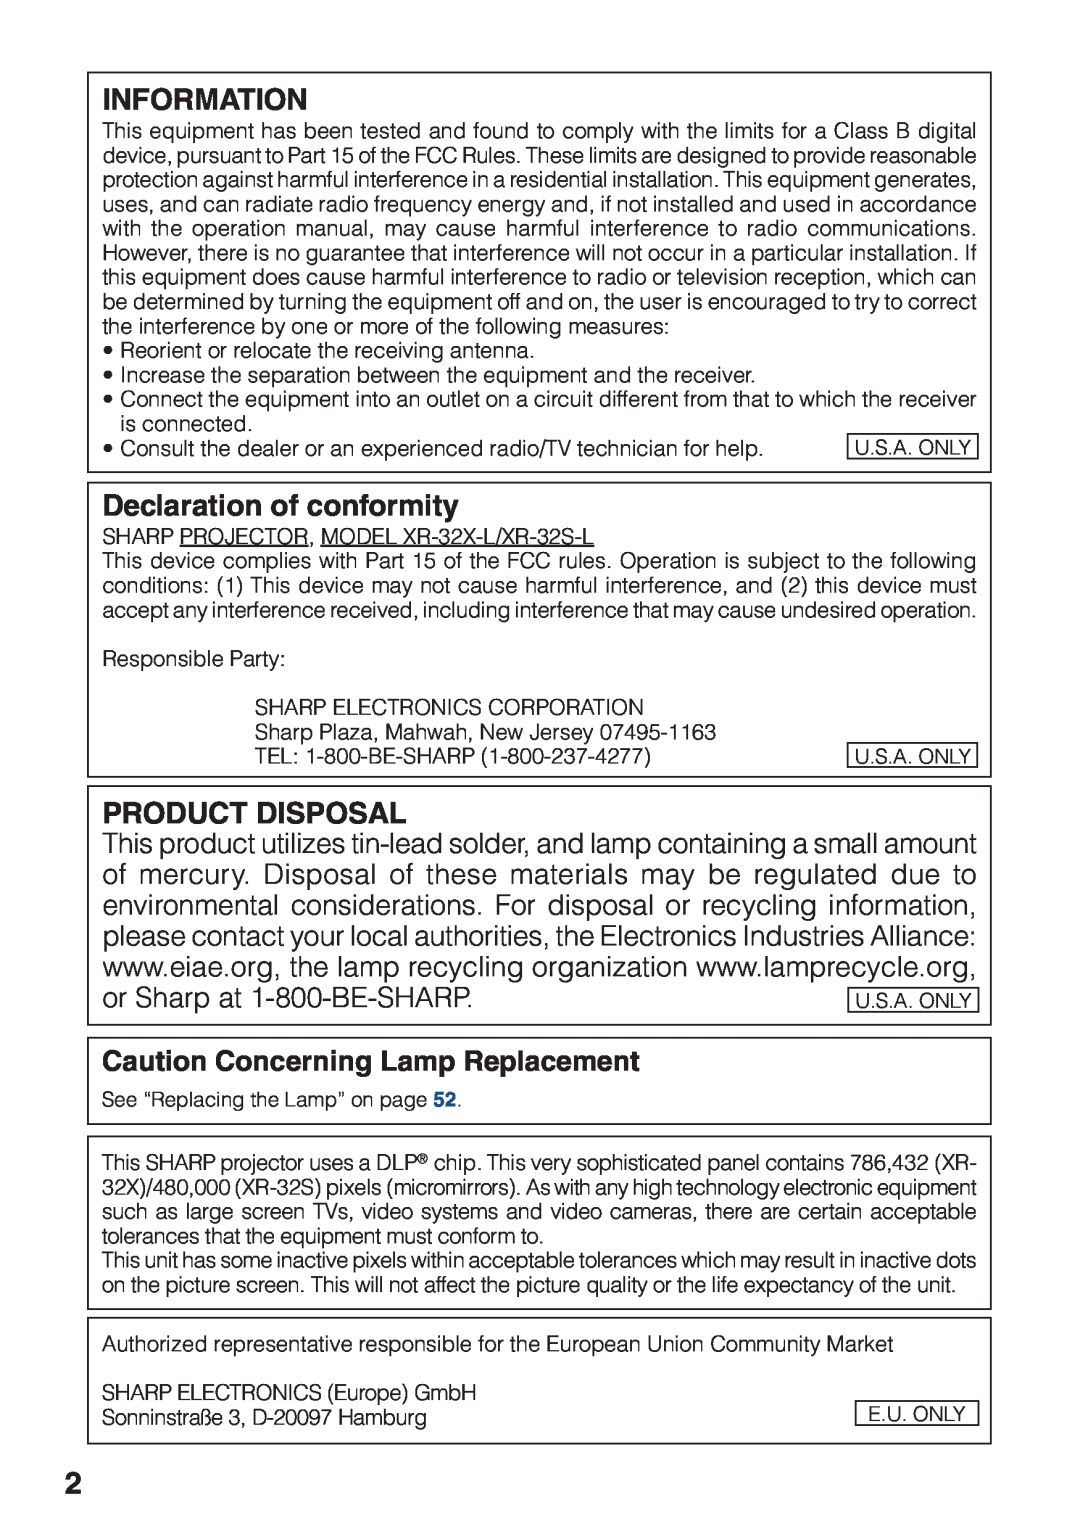 Sharp XR-32X-L, XR-32S-L Information, Declaration of conformity, Product Disposal, Caution Concerning Lamp Replacement 